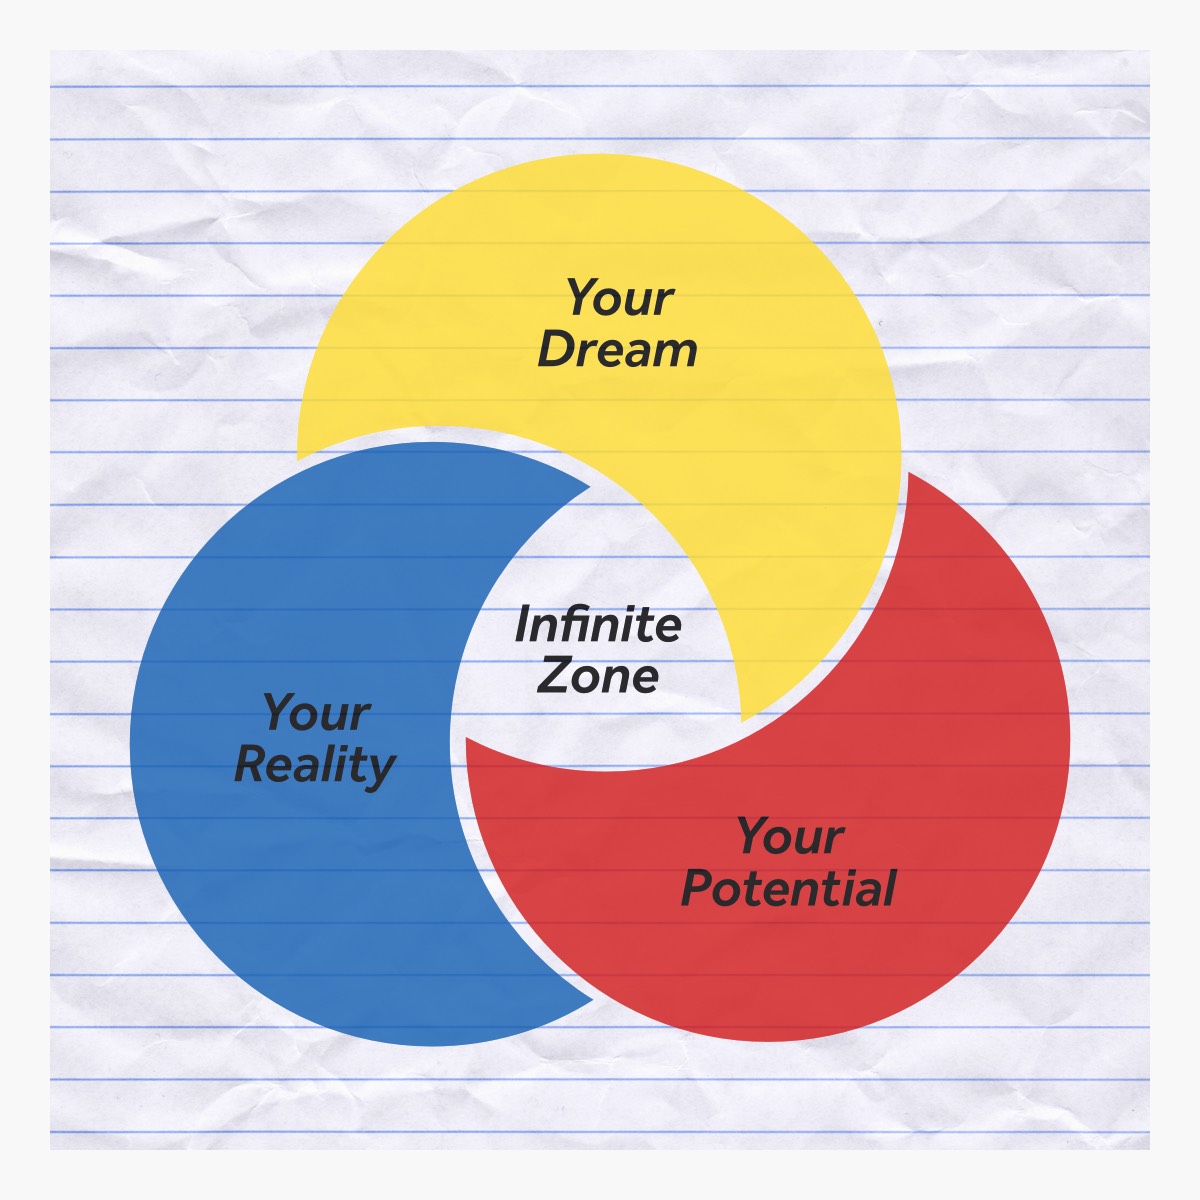 The Infinite Zone is where you make the most of what you already have and power up your potential to bring your dreams to life now.